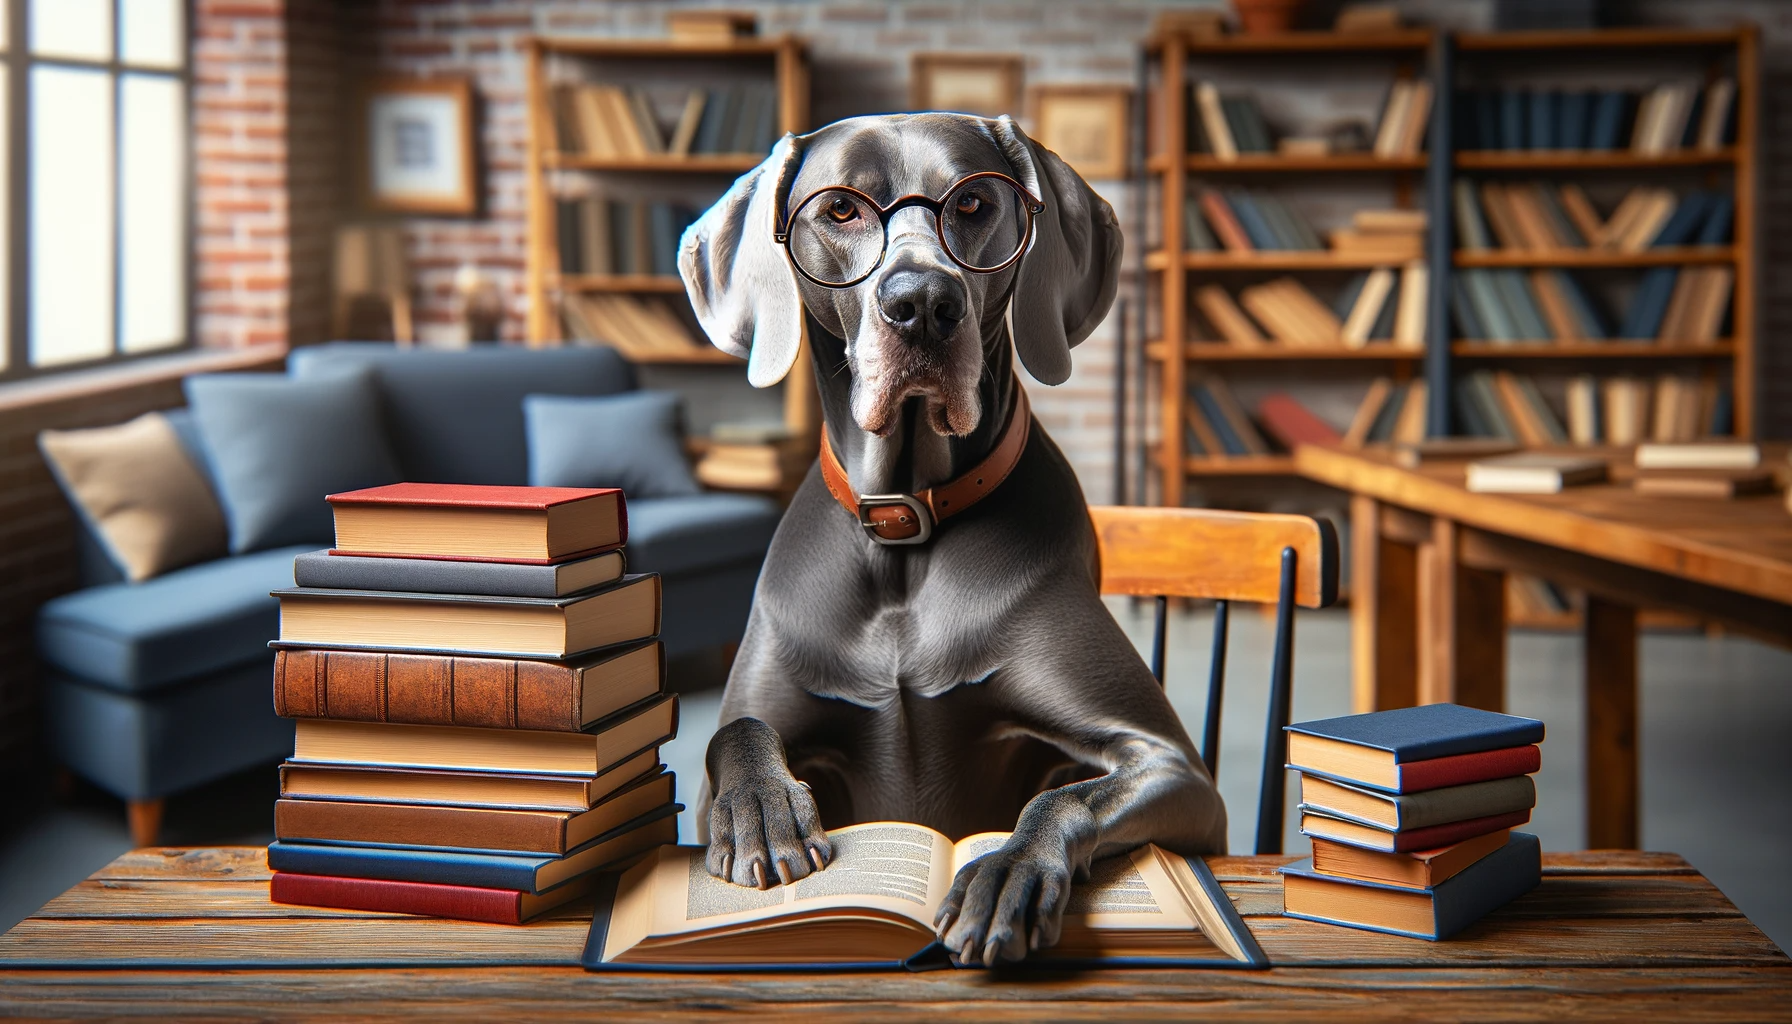 Greyador with reading glasses, humorously posed next to a stack of books